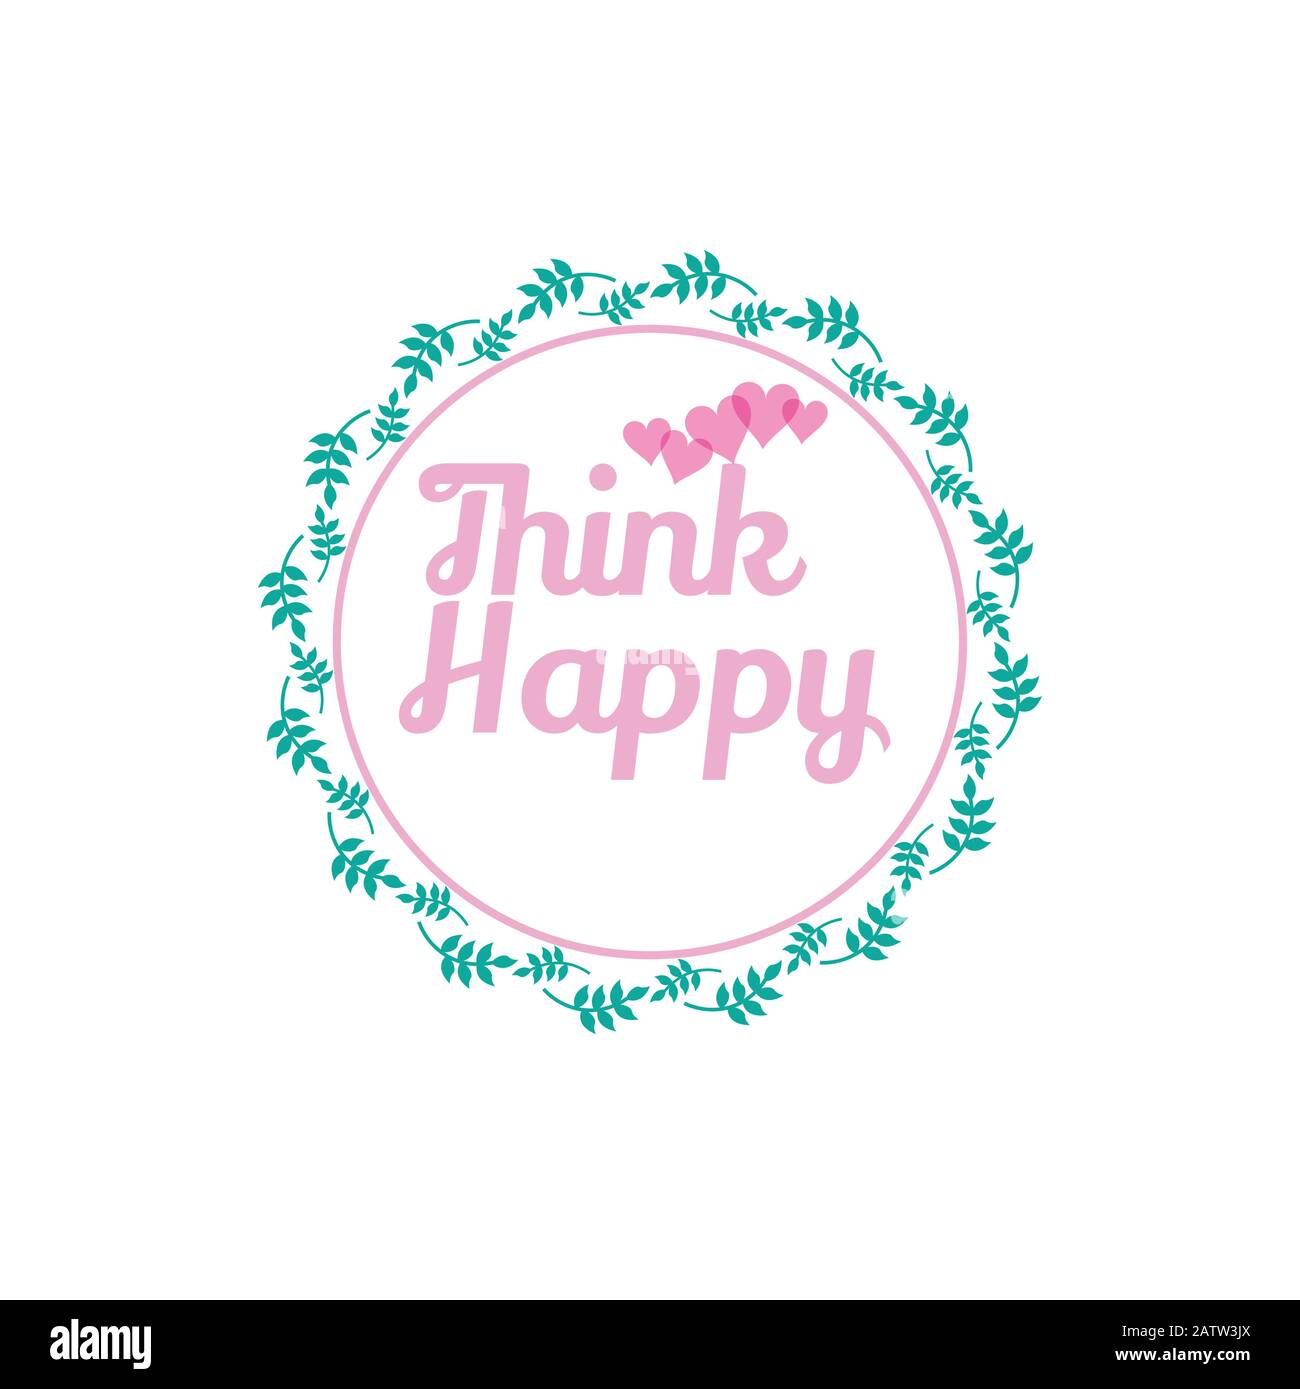 Think happy thoughts. Motivational quote. White background. Stock Vector